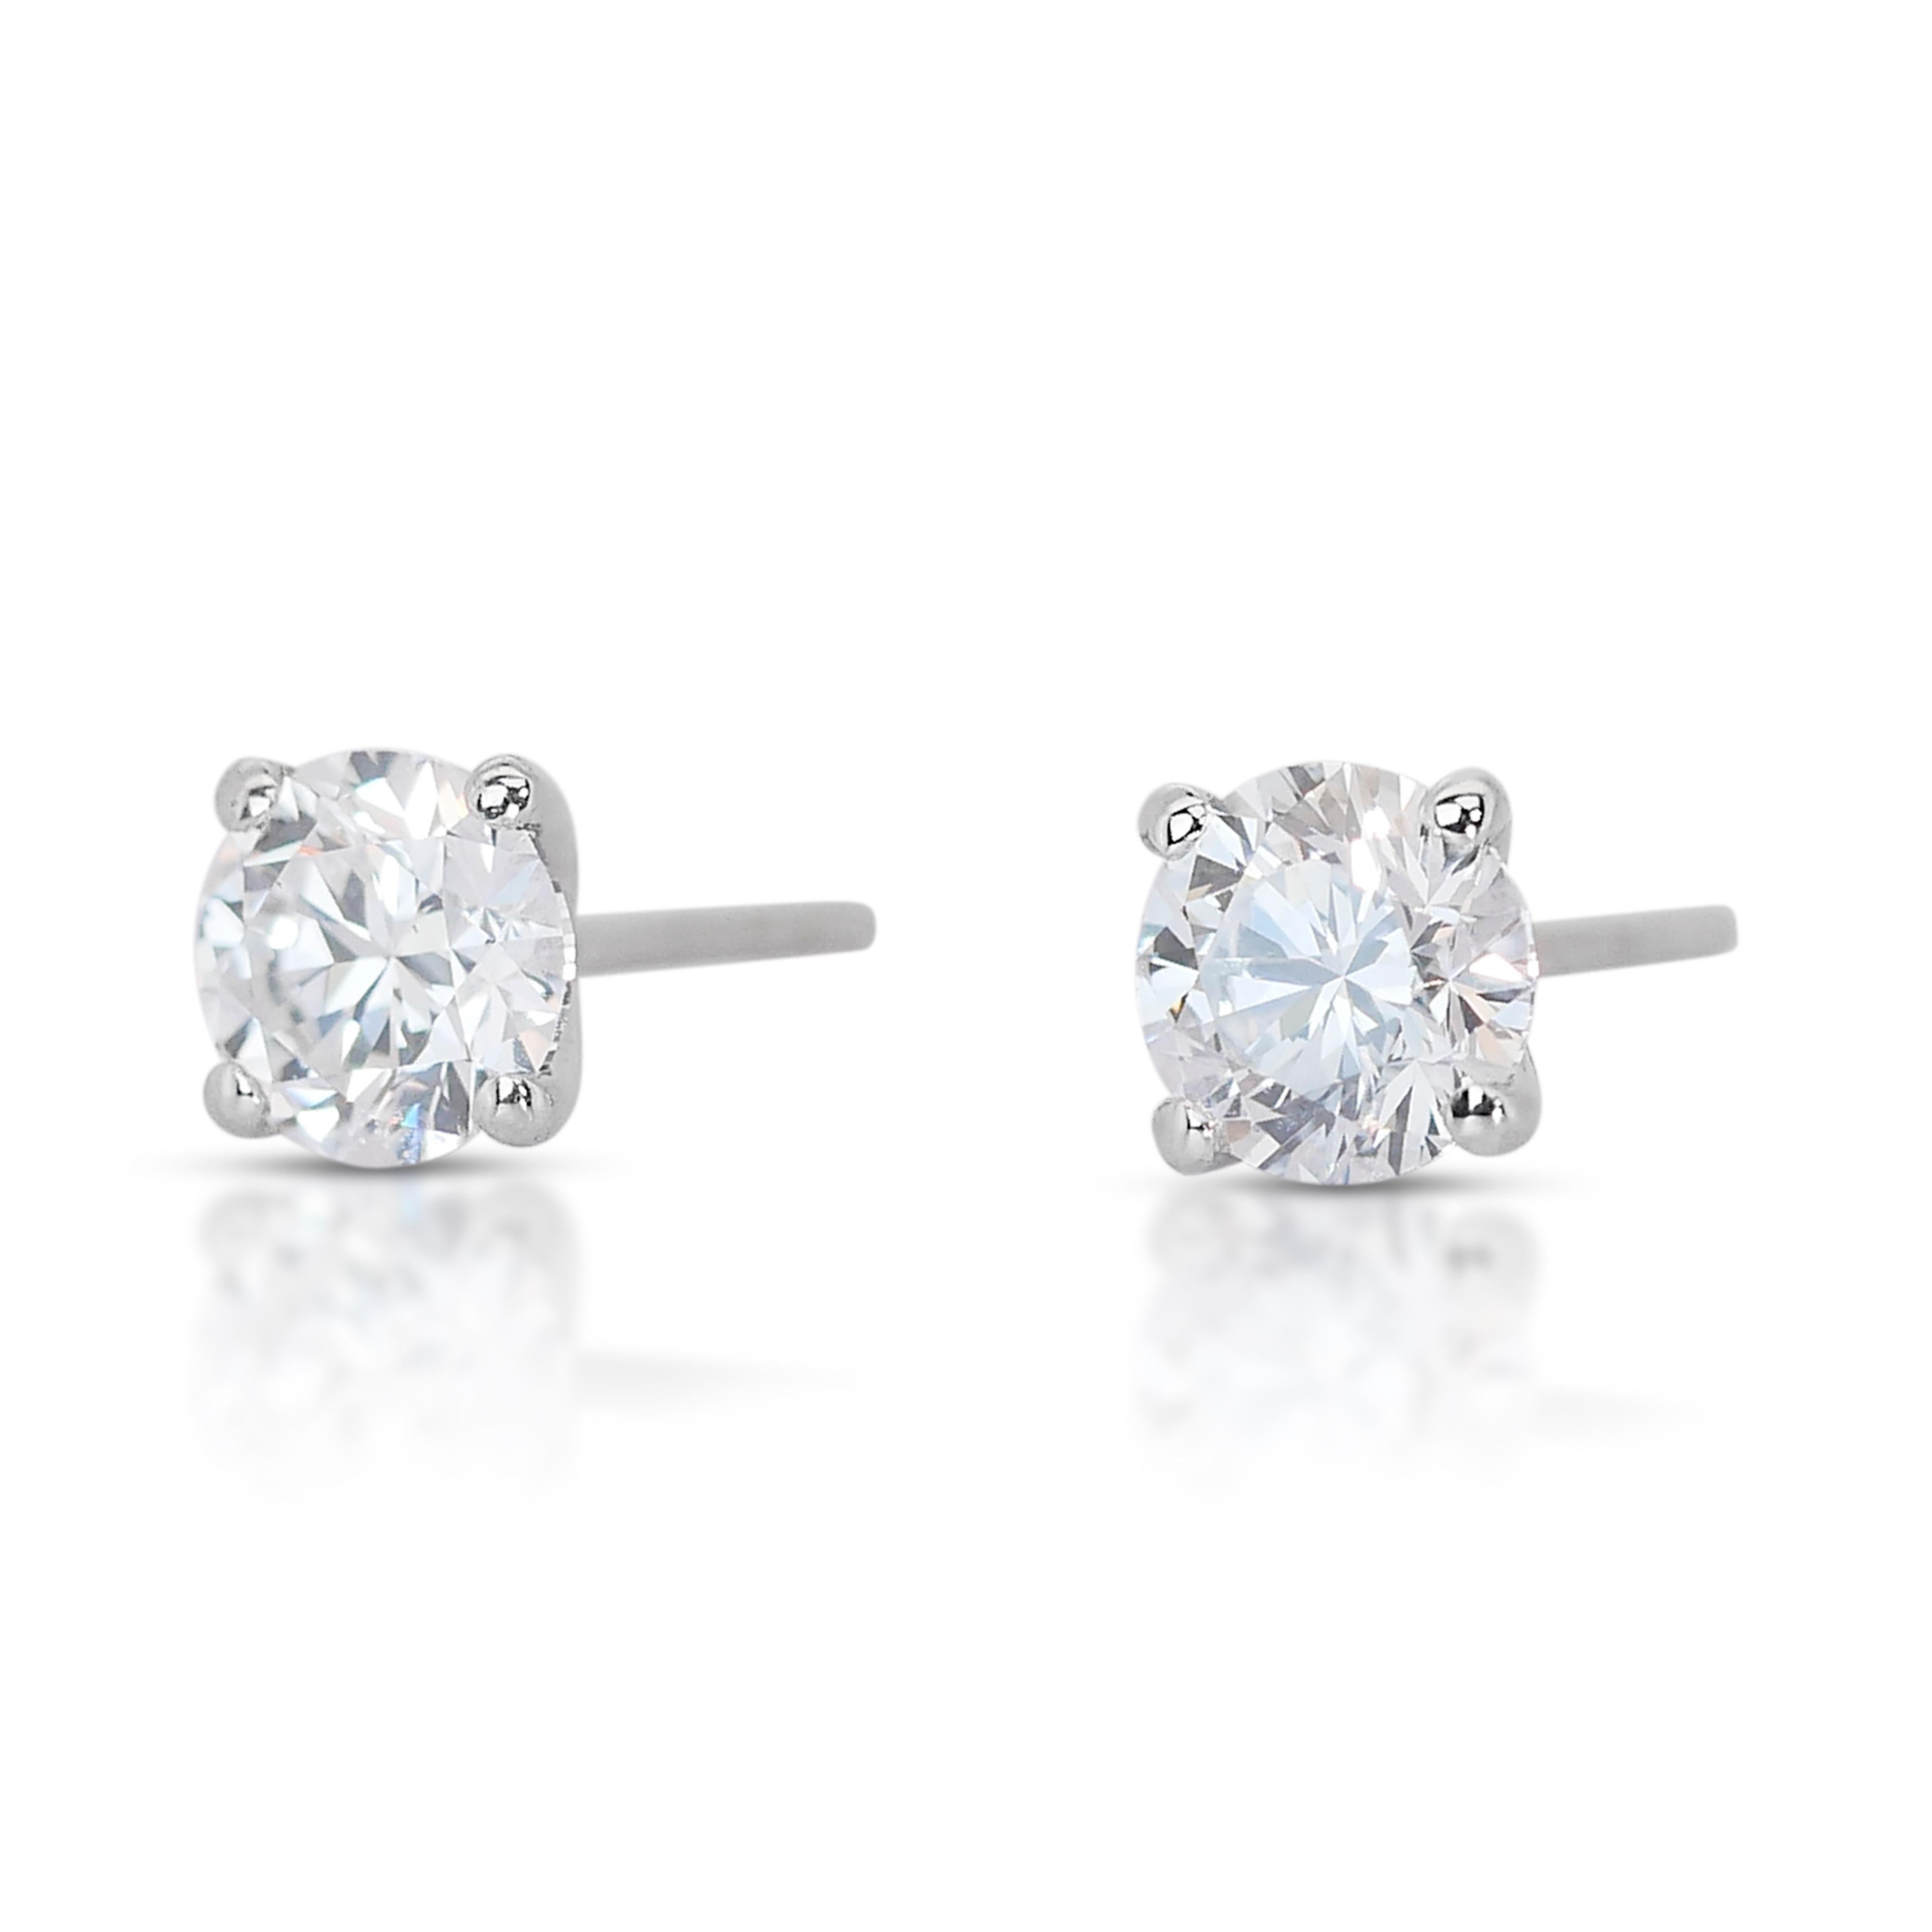 Women's Gleaming 18K White Gold Diamond Stud Earrings with 1.8ct- GIA Certified For Sale